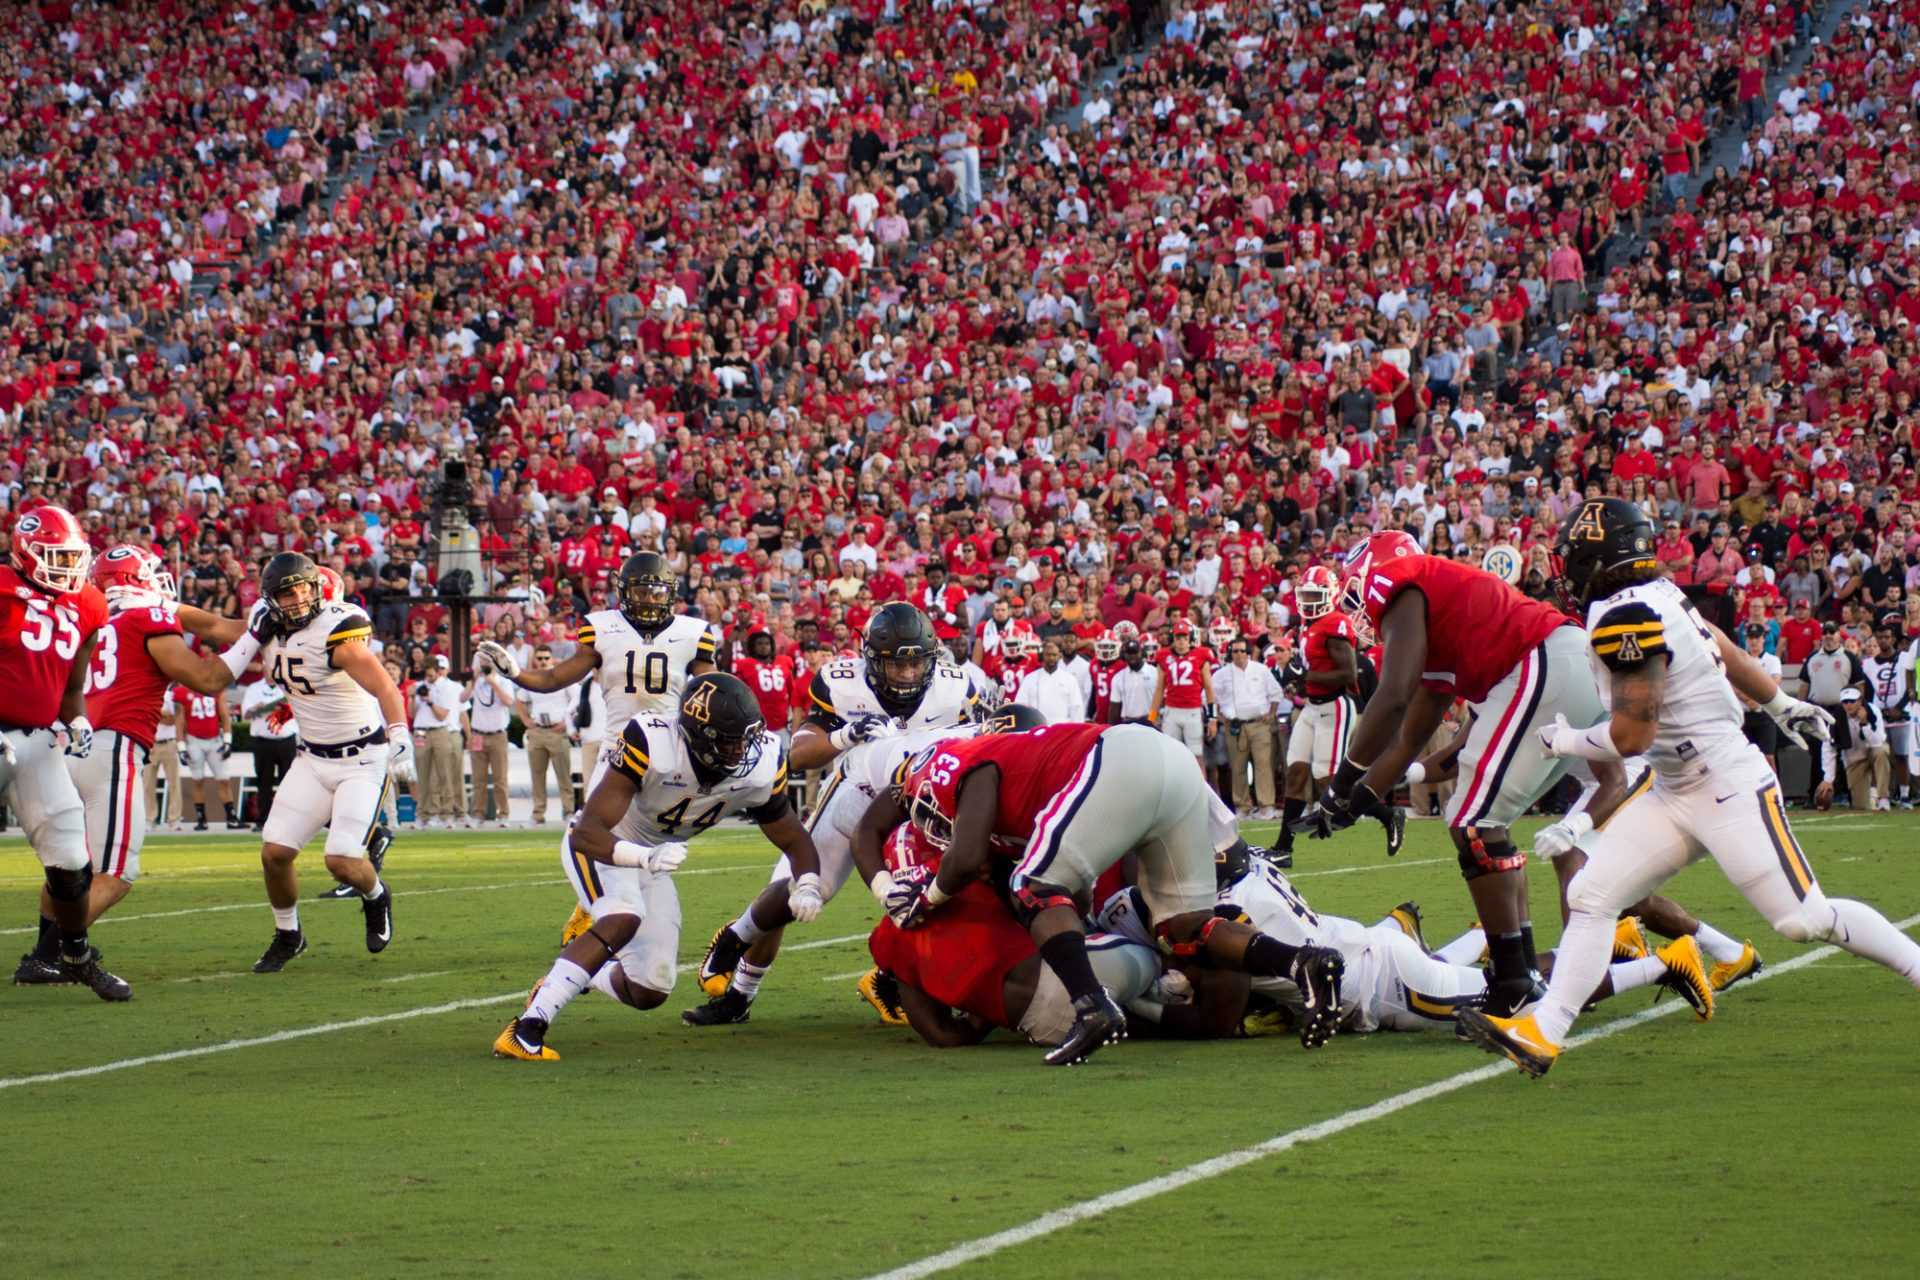 Inside Linebacker Anthony Flory trying to stop the Georgia rushing attack at Sanford Stadium on September 2, 2017. The final score 31-10 University of Georgia. 